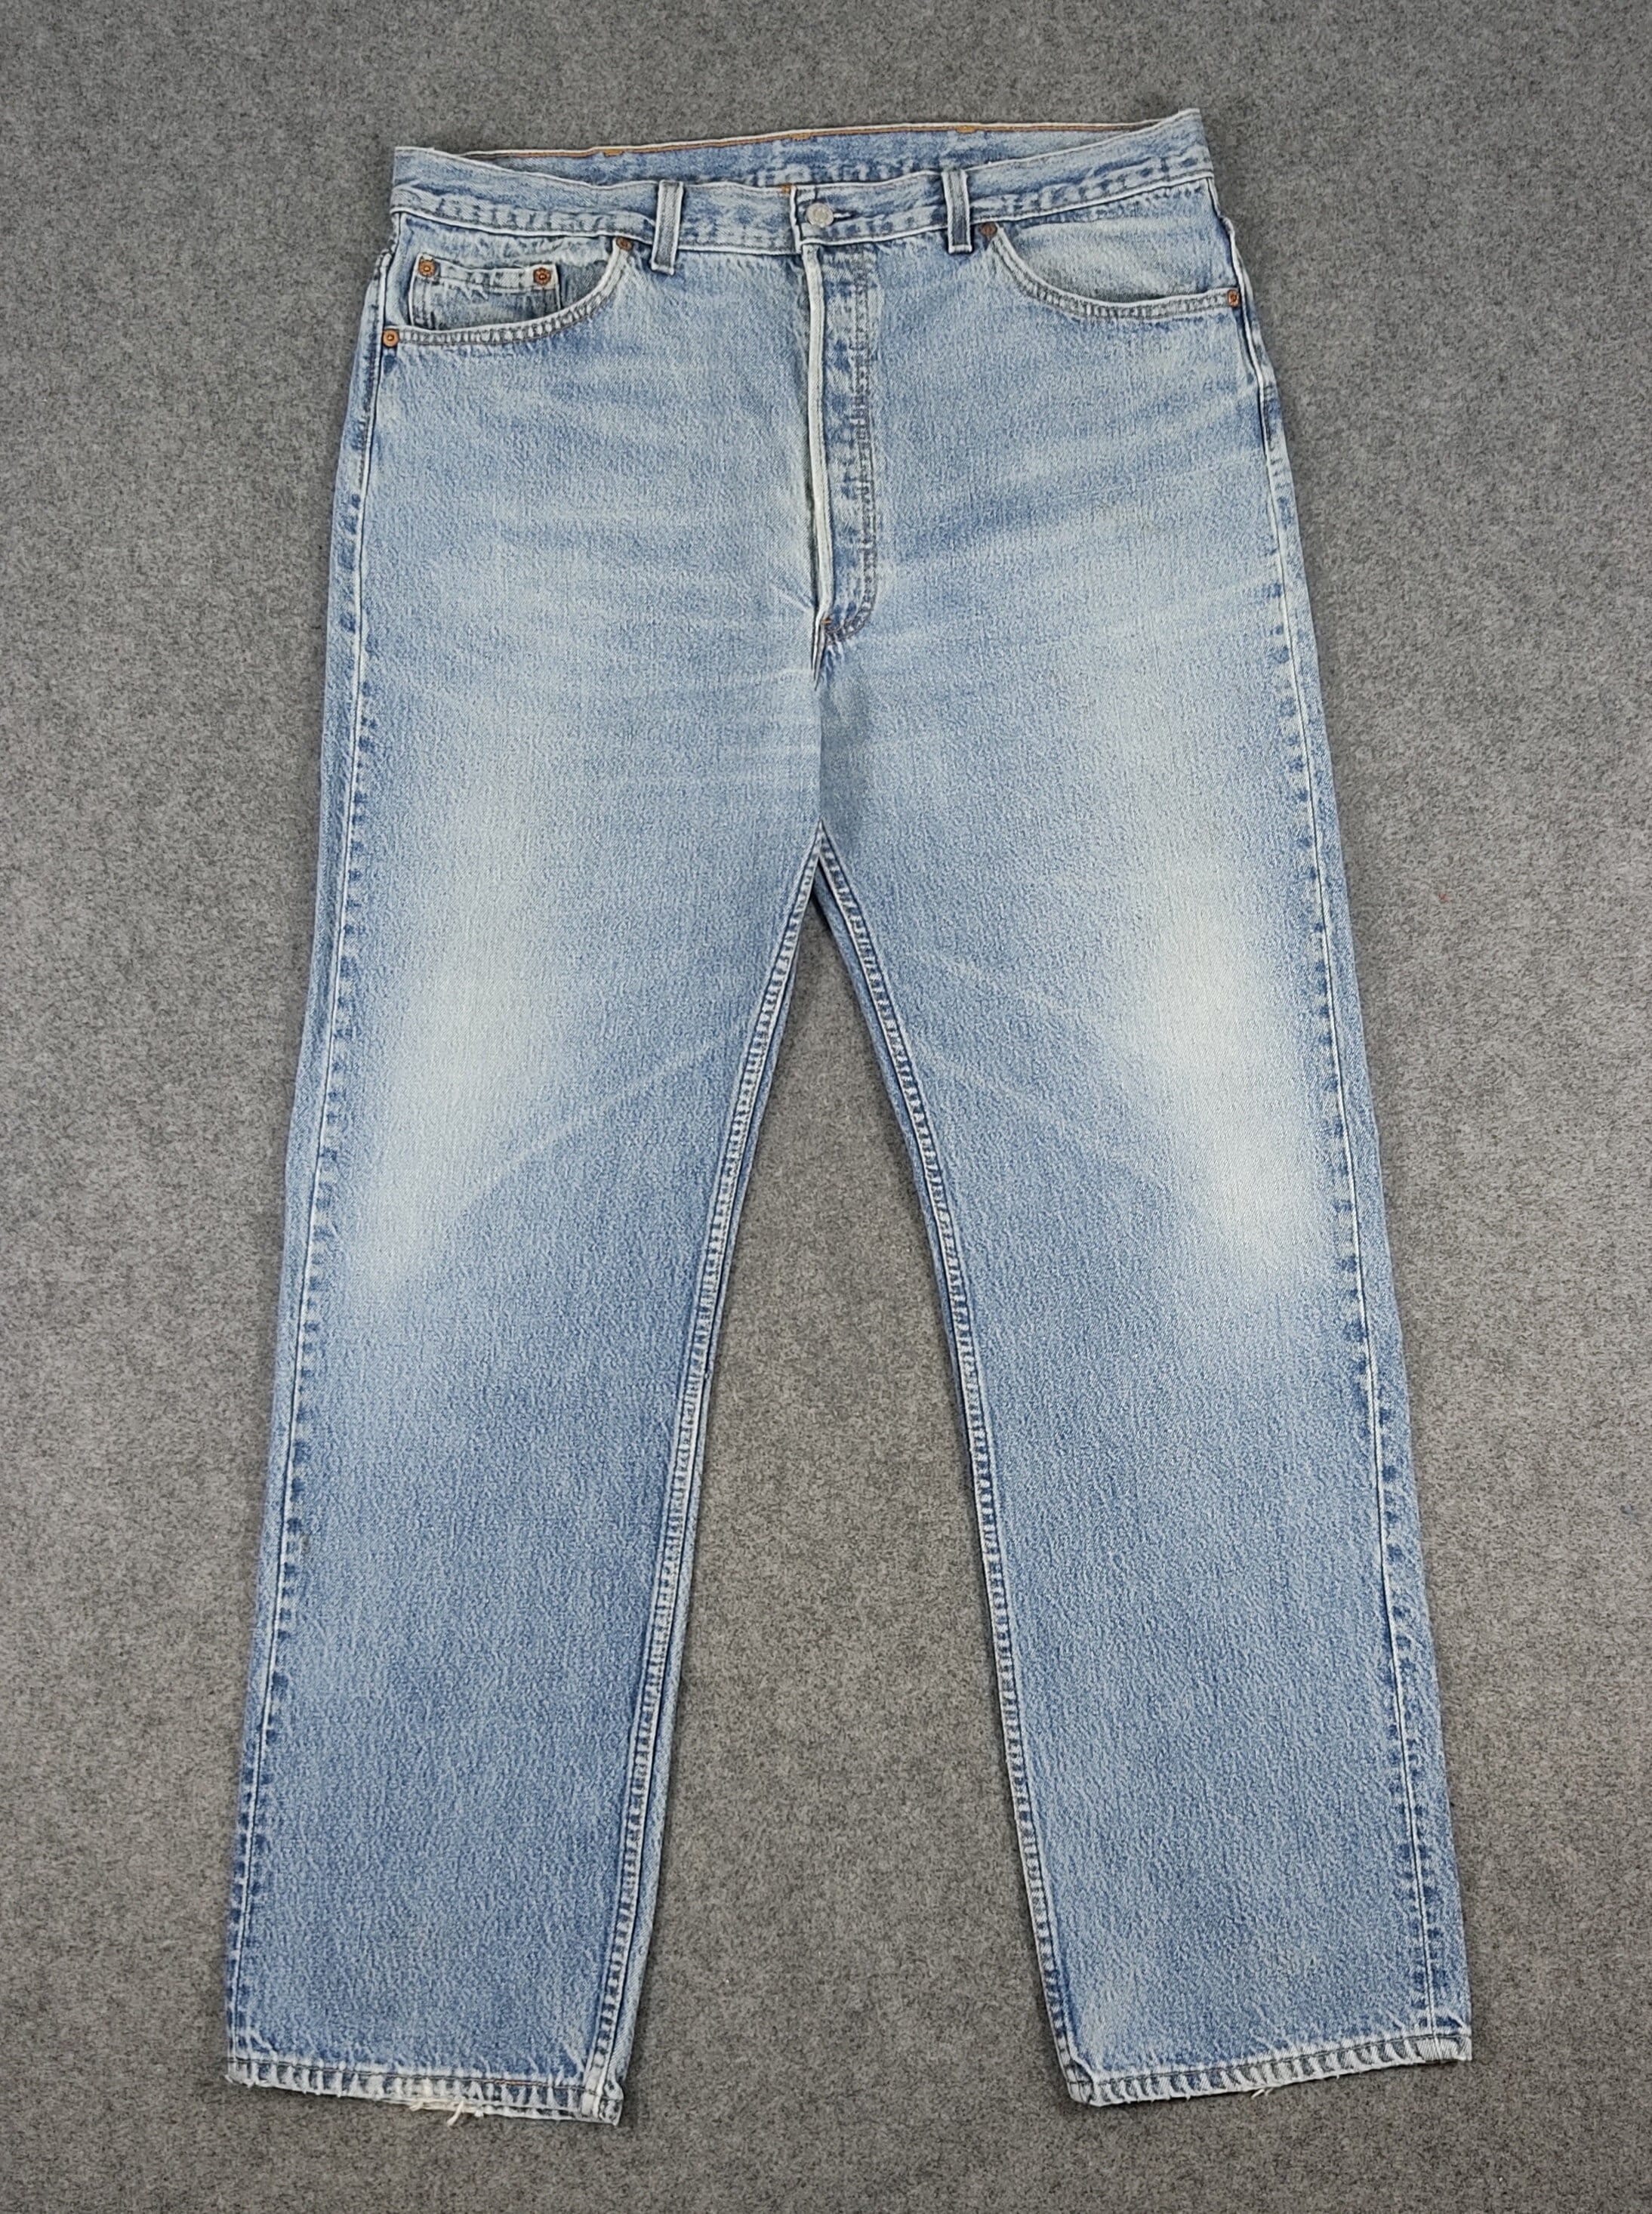 38 X 32 90s Vintage Levis 501 Jeans Made in Usa Light Wash - Etsy 